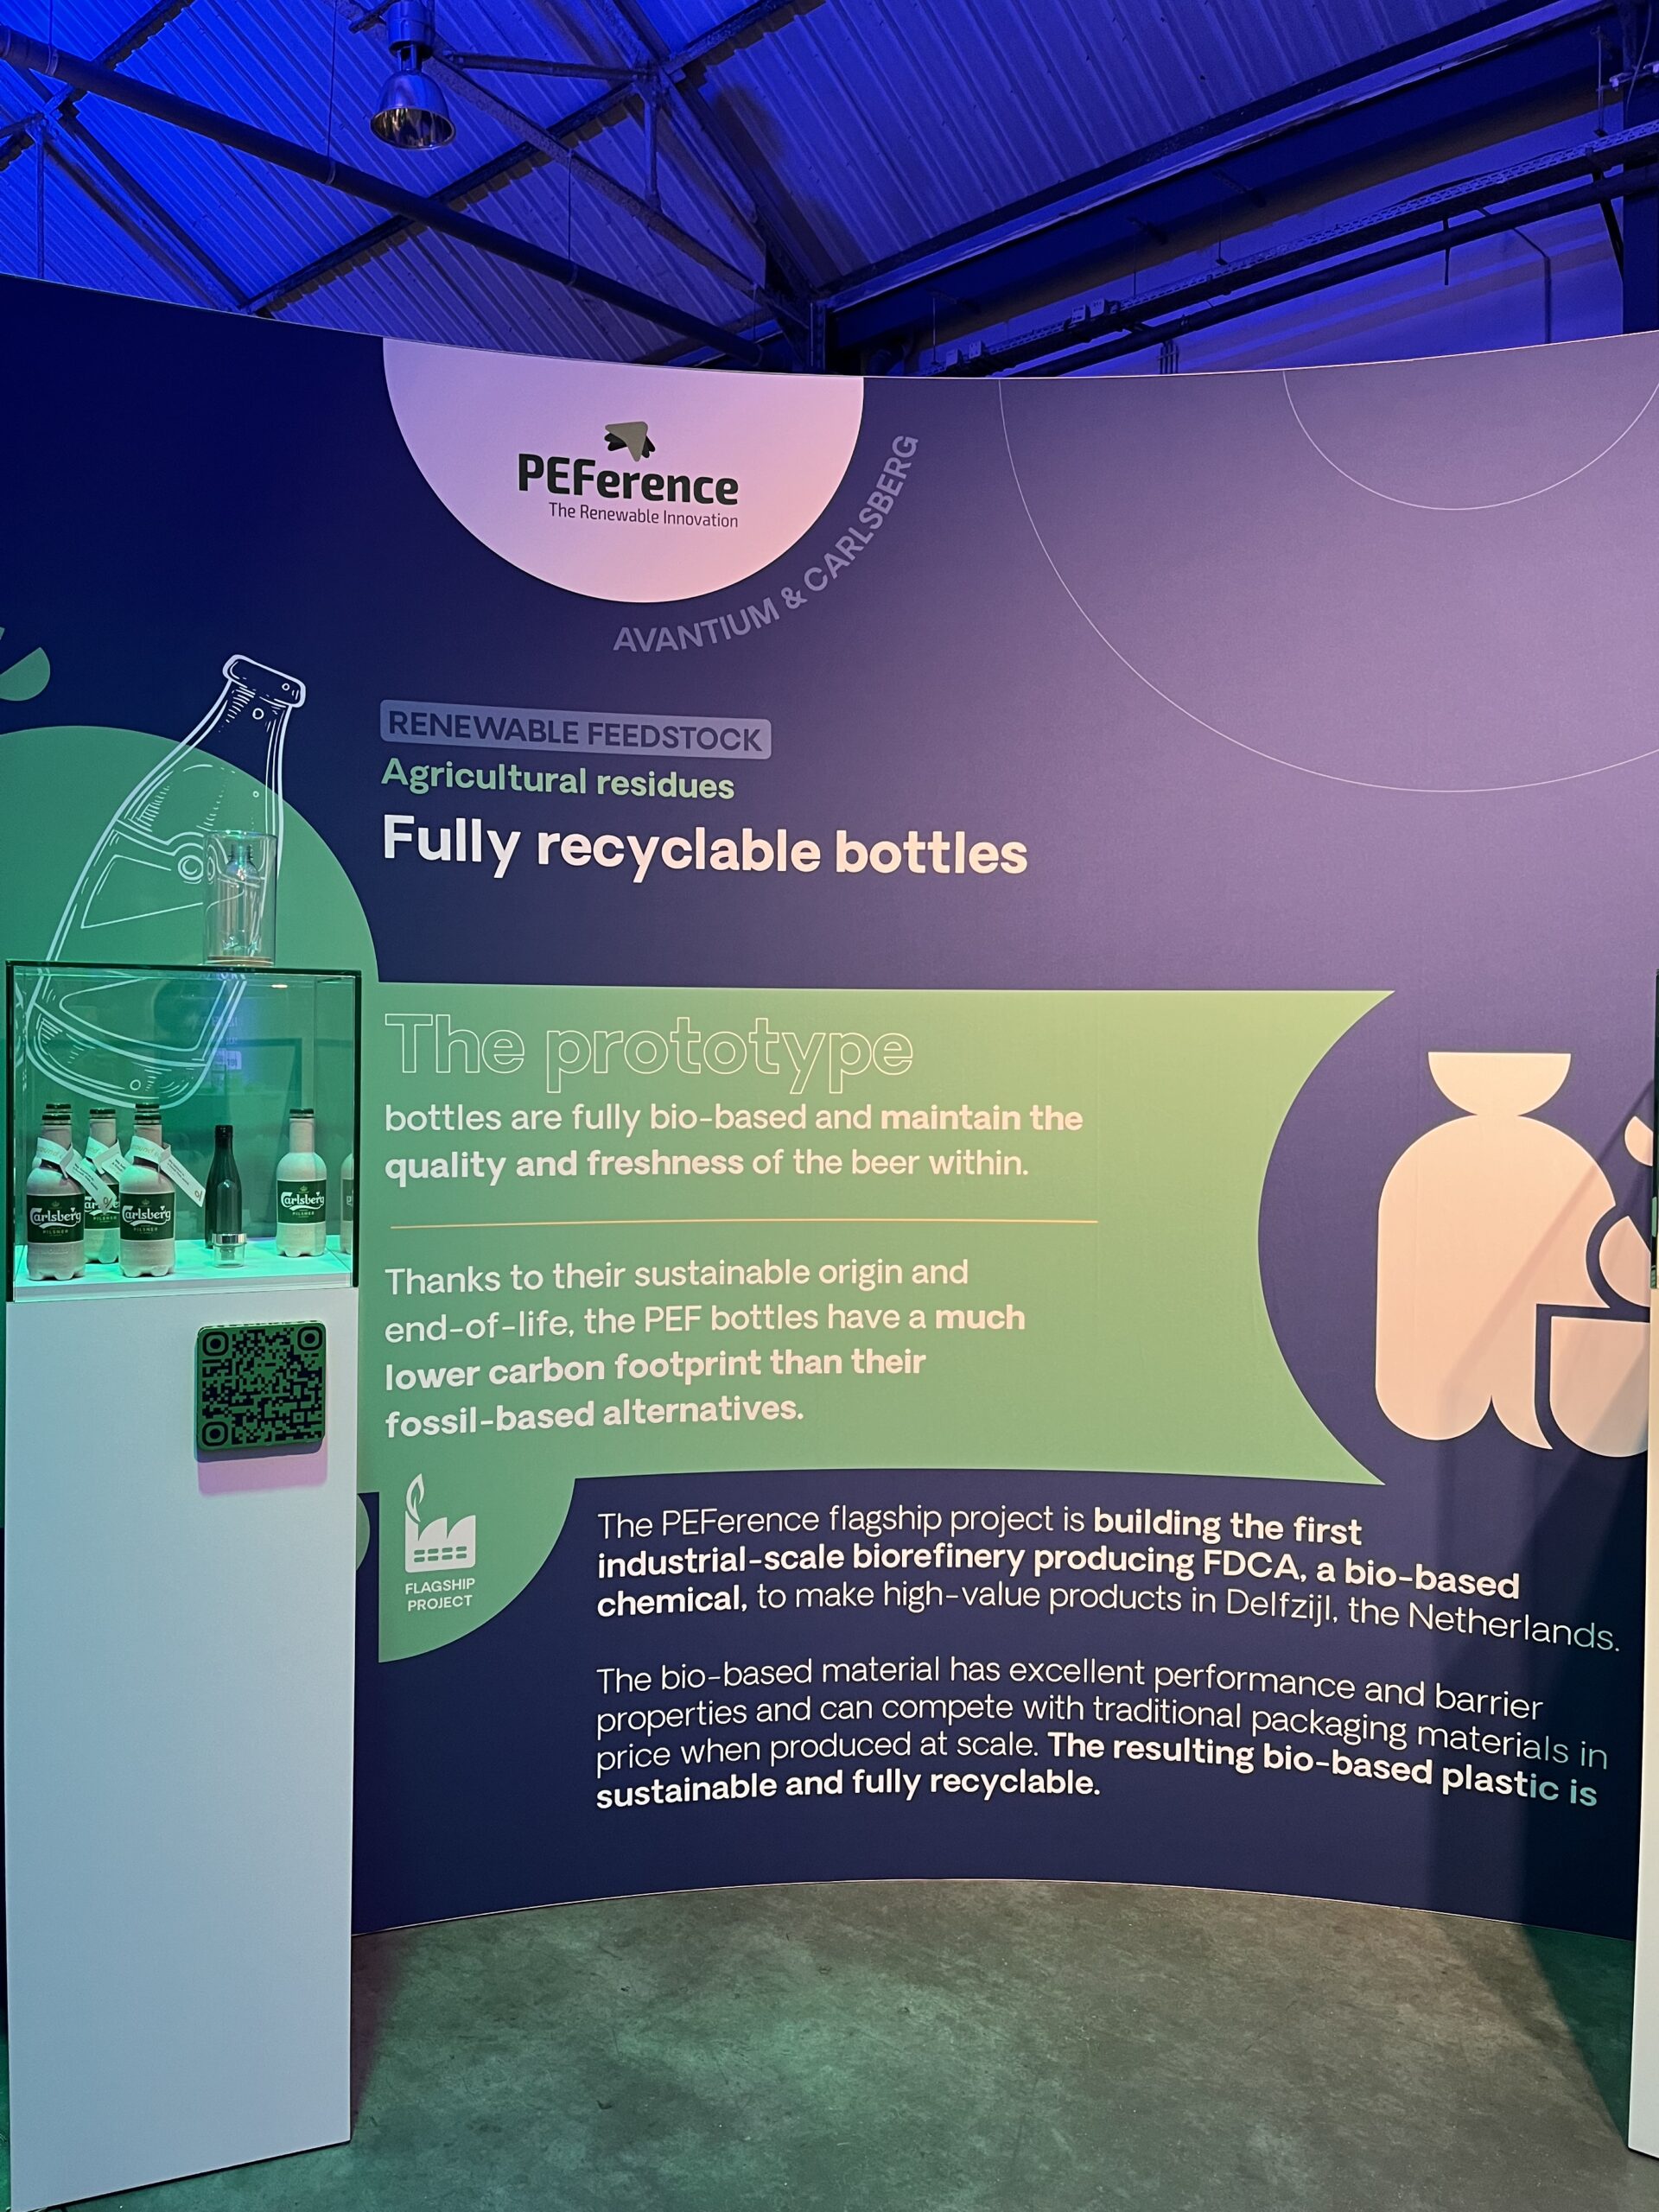 Carlsberg paper bottle and PEF bottles displayed in glass showcase, PEFerence logo and text about demonstrators at a green and violet curved wall in the background, violet and green lights 